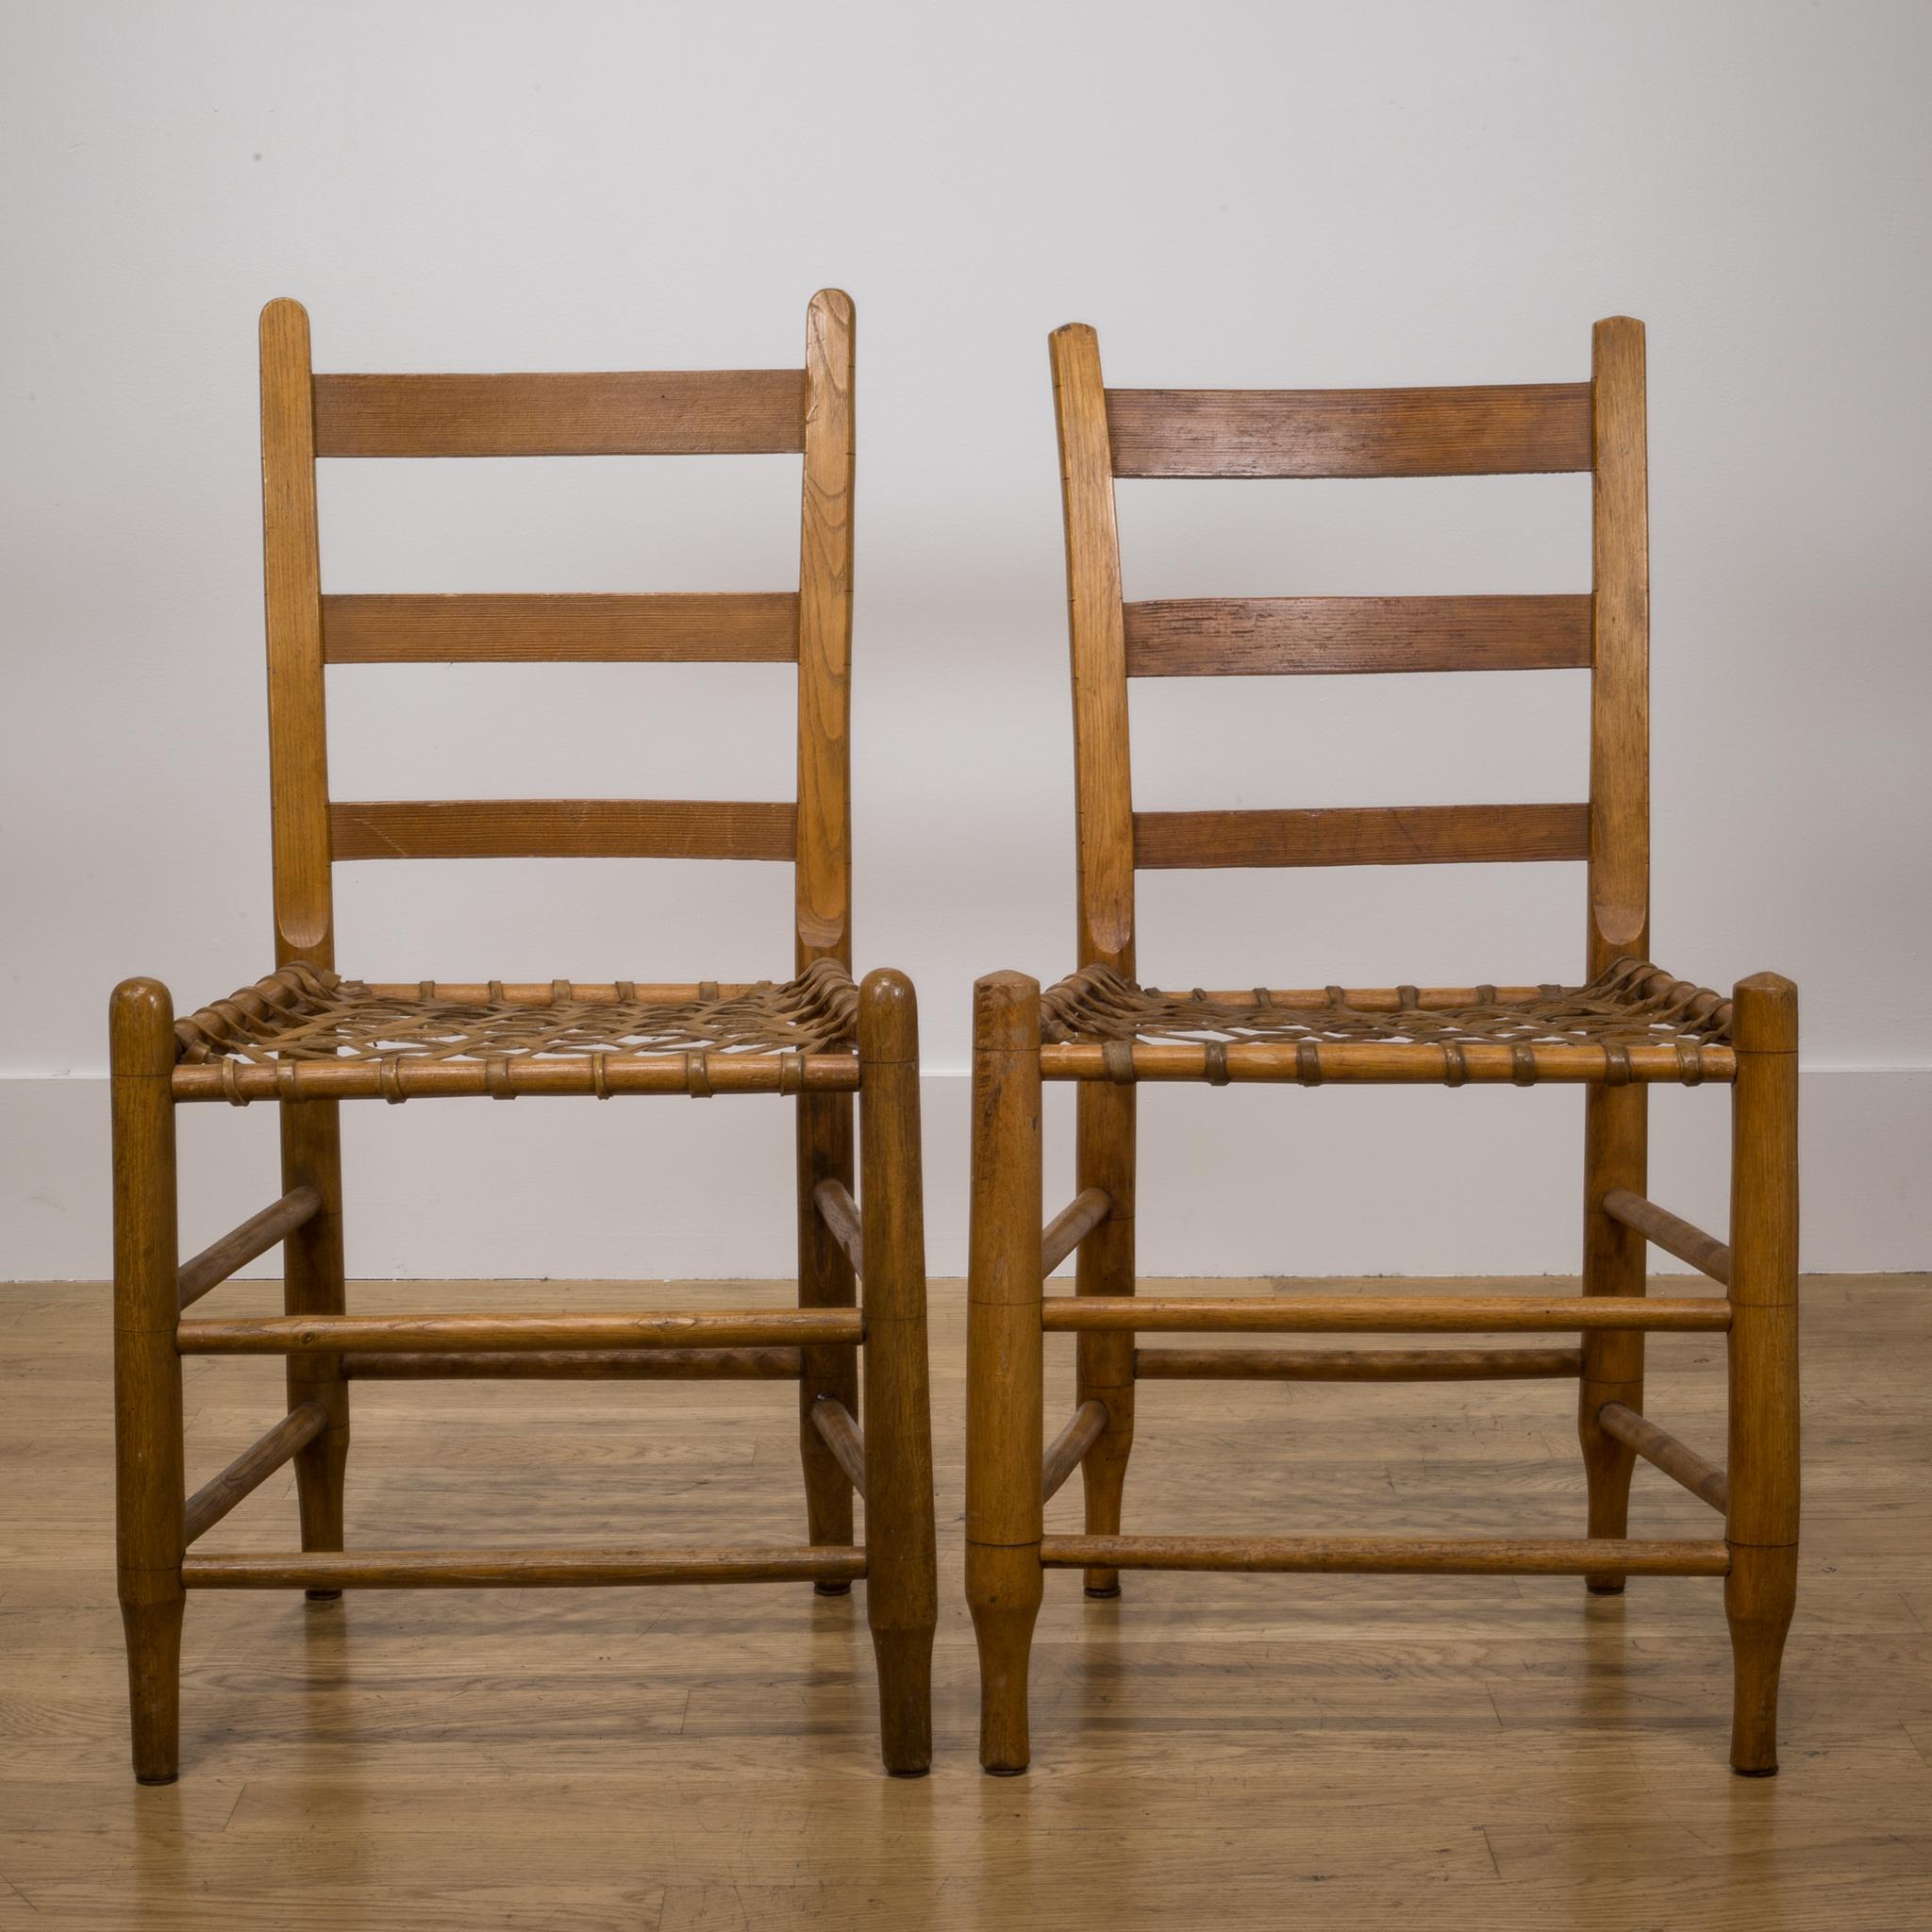 19th c. Handmade Wood/Rawhide Chairs from Historic  Oregon Commune c. 1856-1866 4